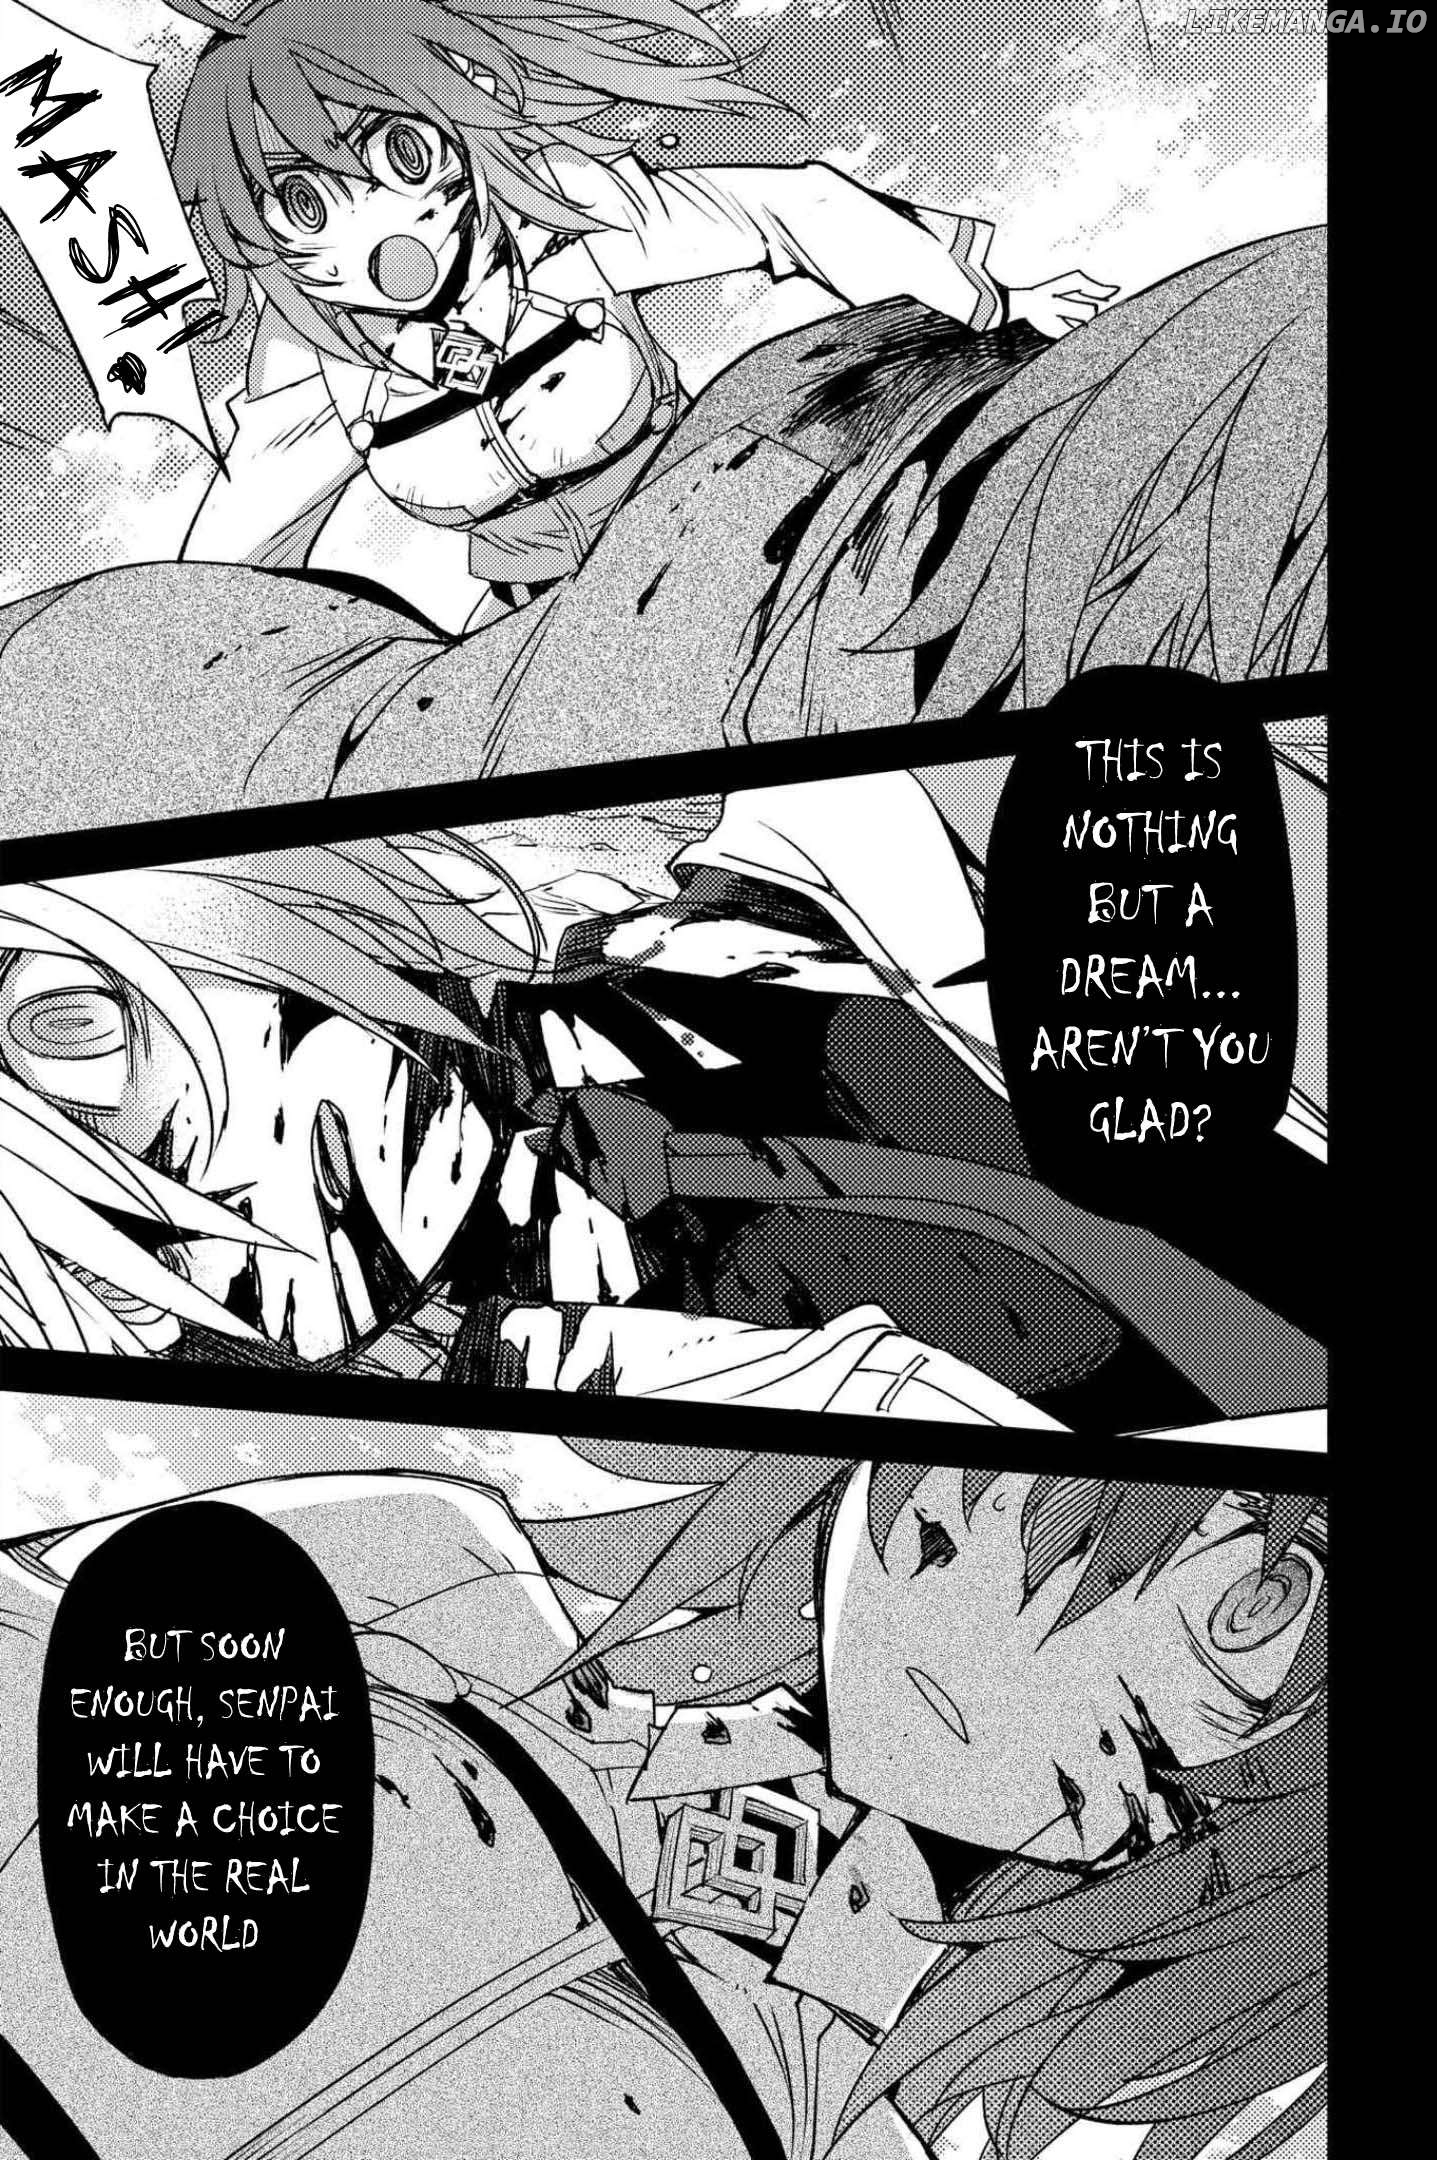 Fate/Grand Order: Epic of Remnant - Subspecies Singularity IV: Taboo Advent Salem: Salem of Heresy Chapter 27 - page 3